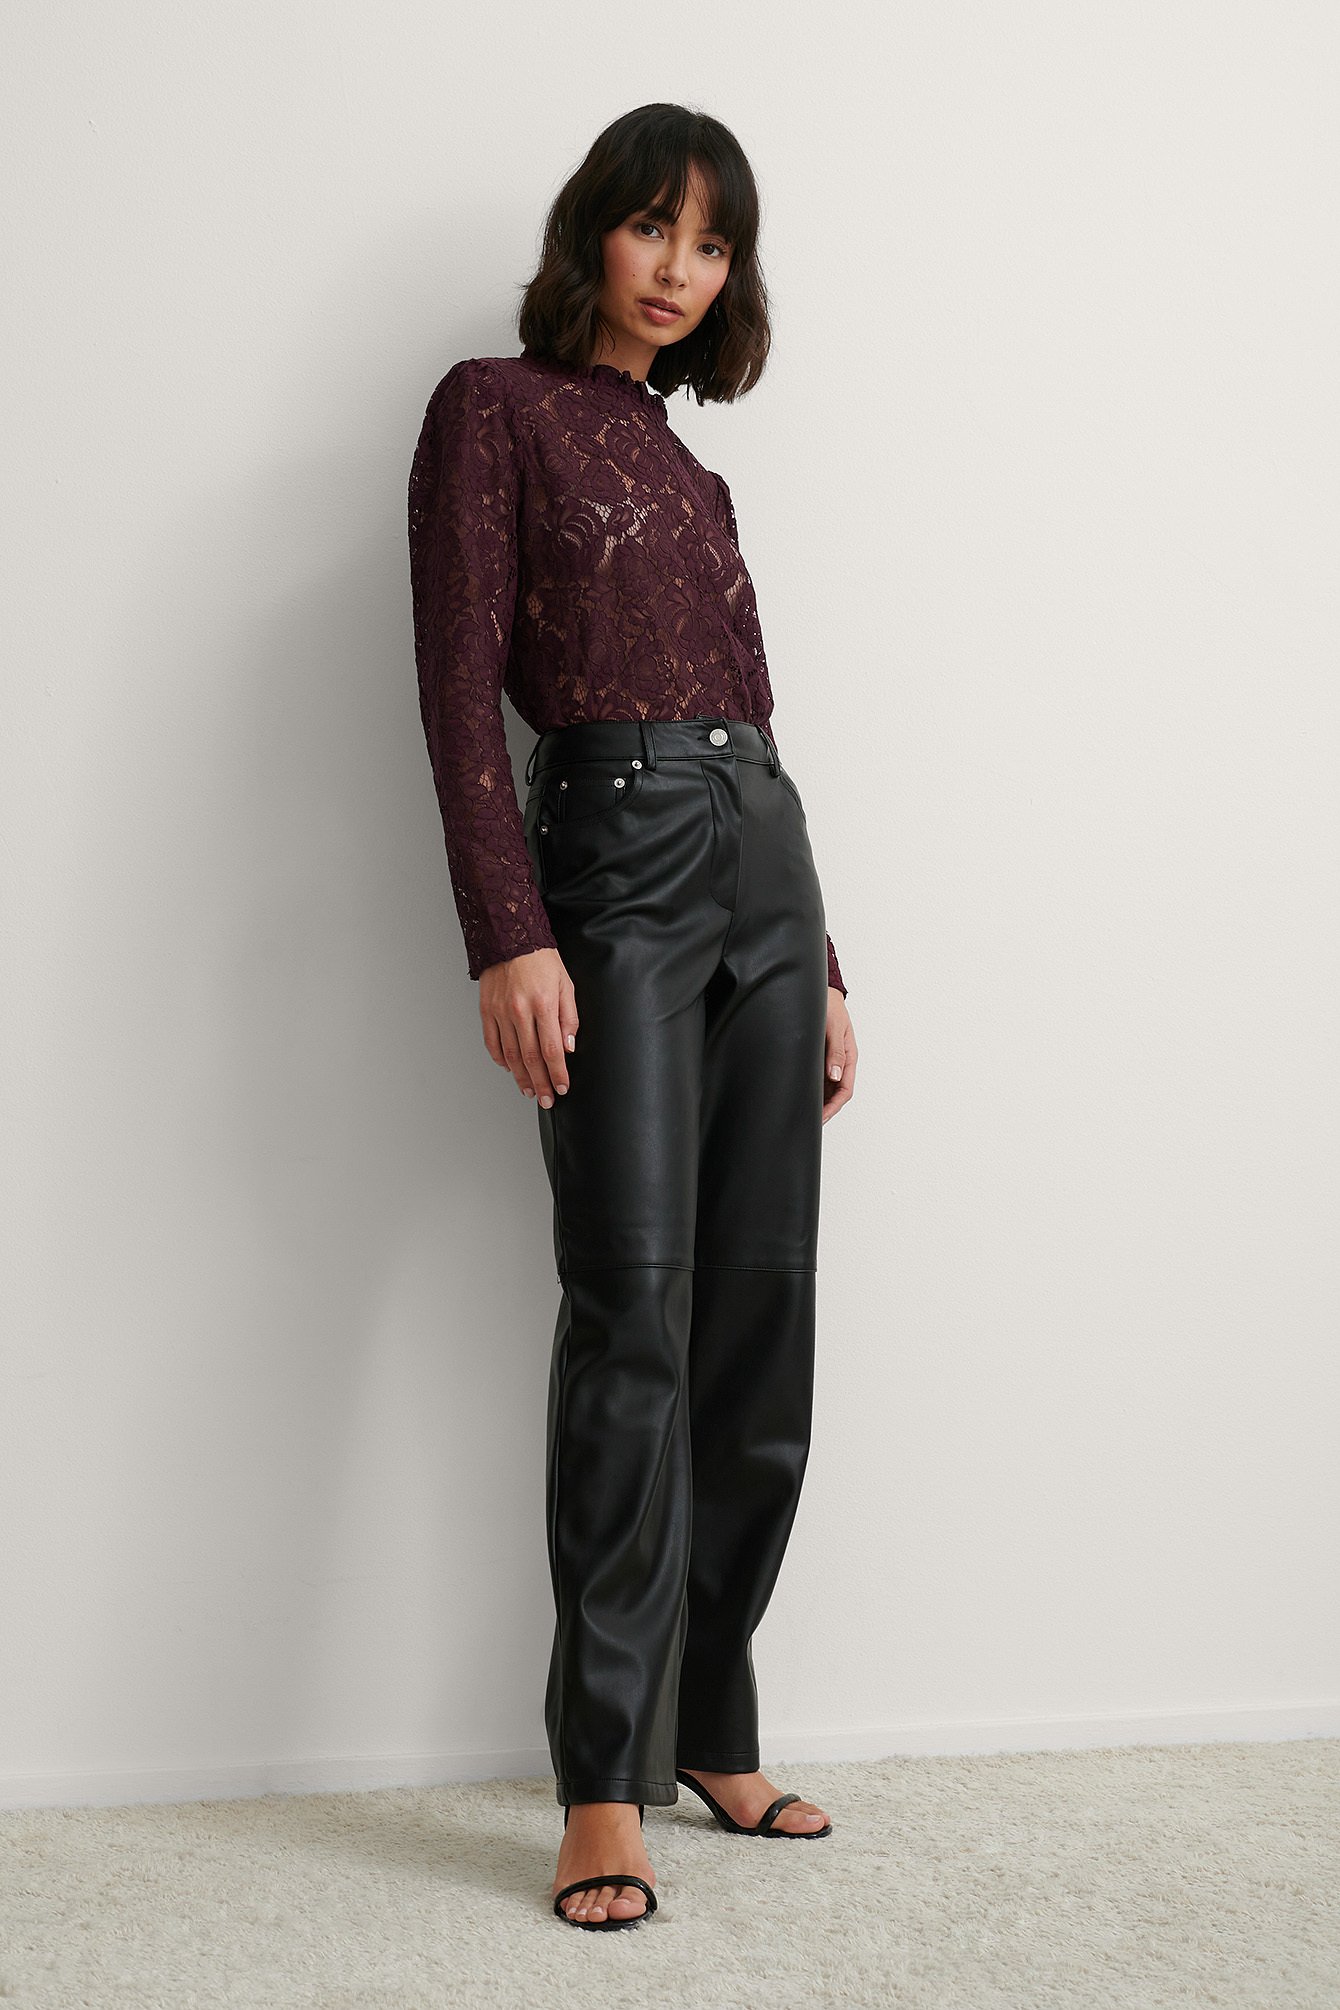 Burgundy High Neck Frill Lace Blouse